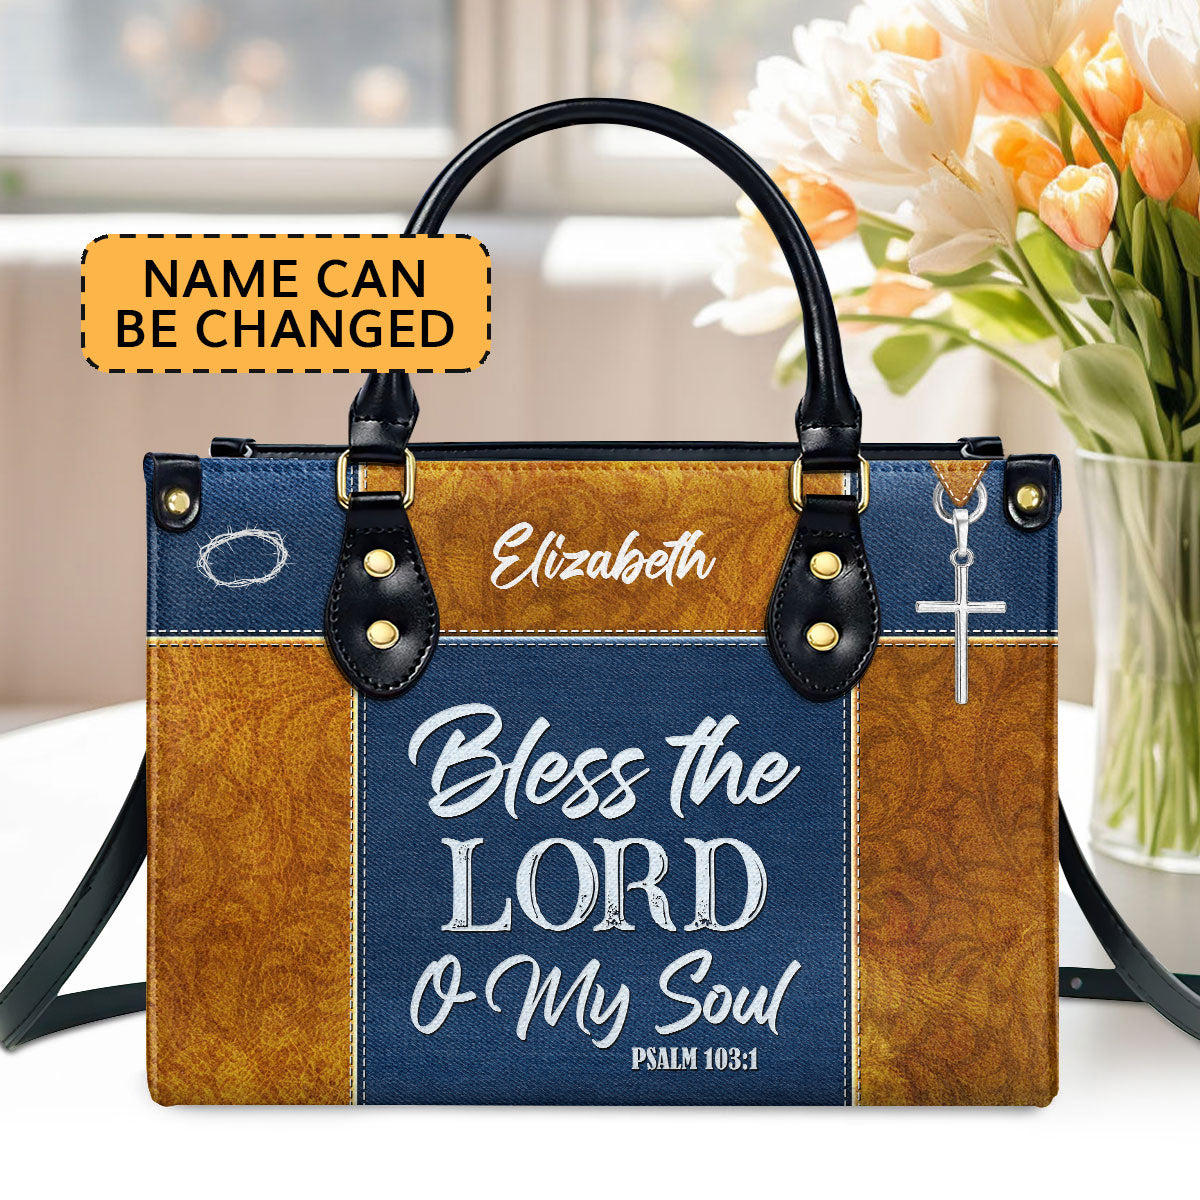 Psalm 1031 Bless The Lord O My Soul Personalized Leather Handbag With Handle Christ Gifts For Women Of God